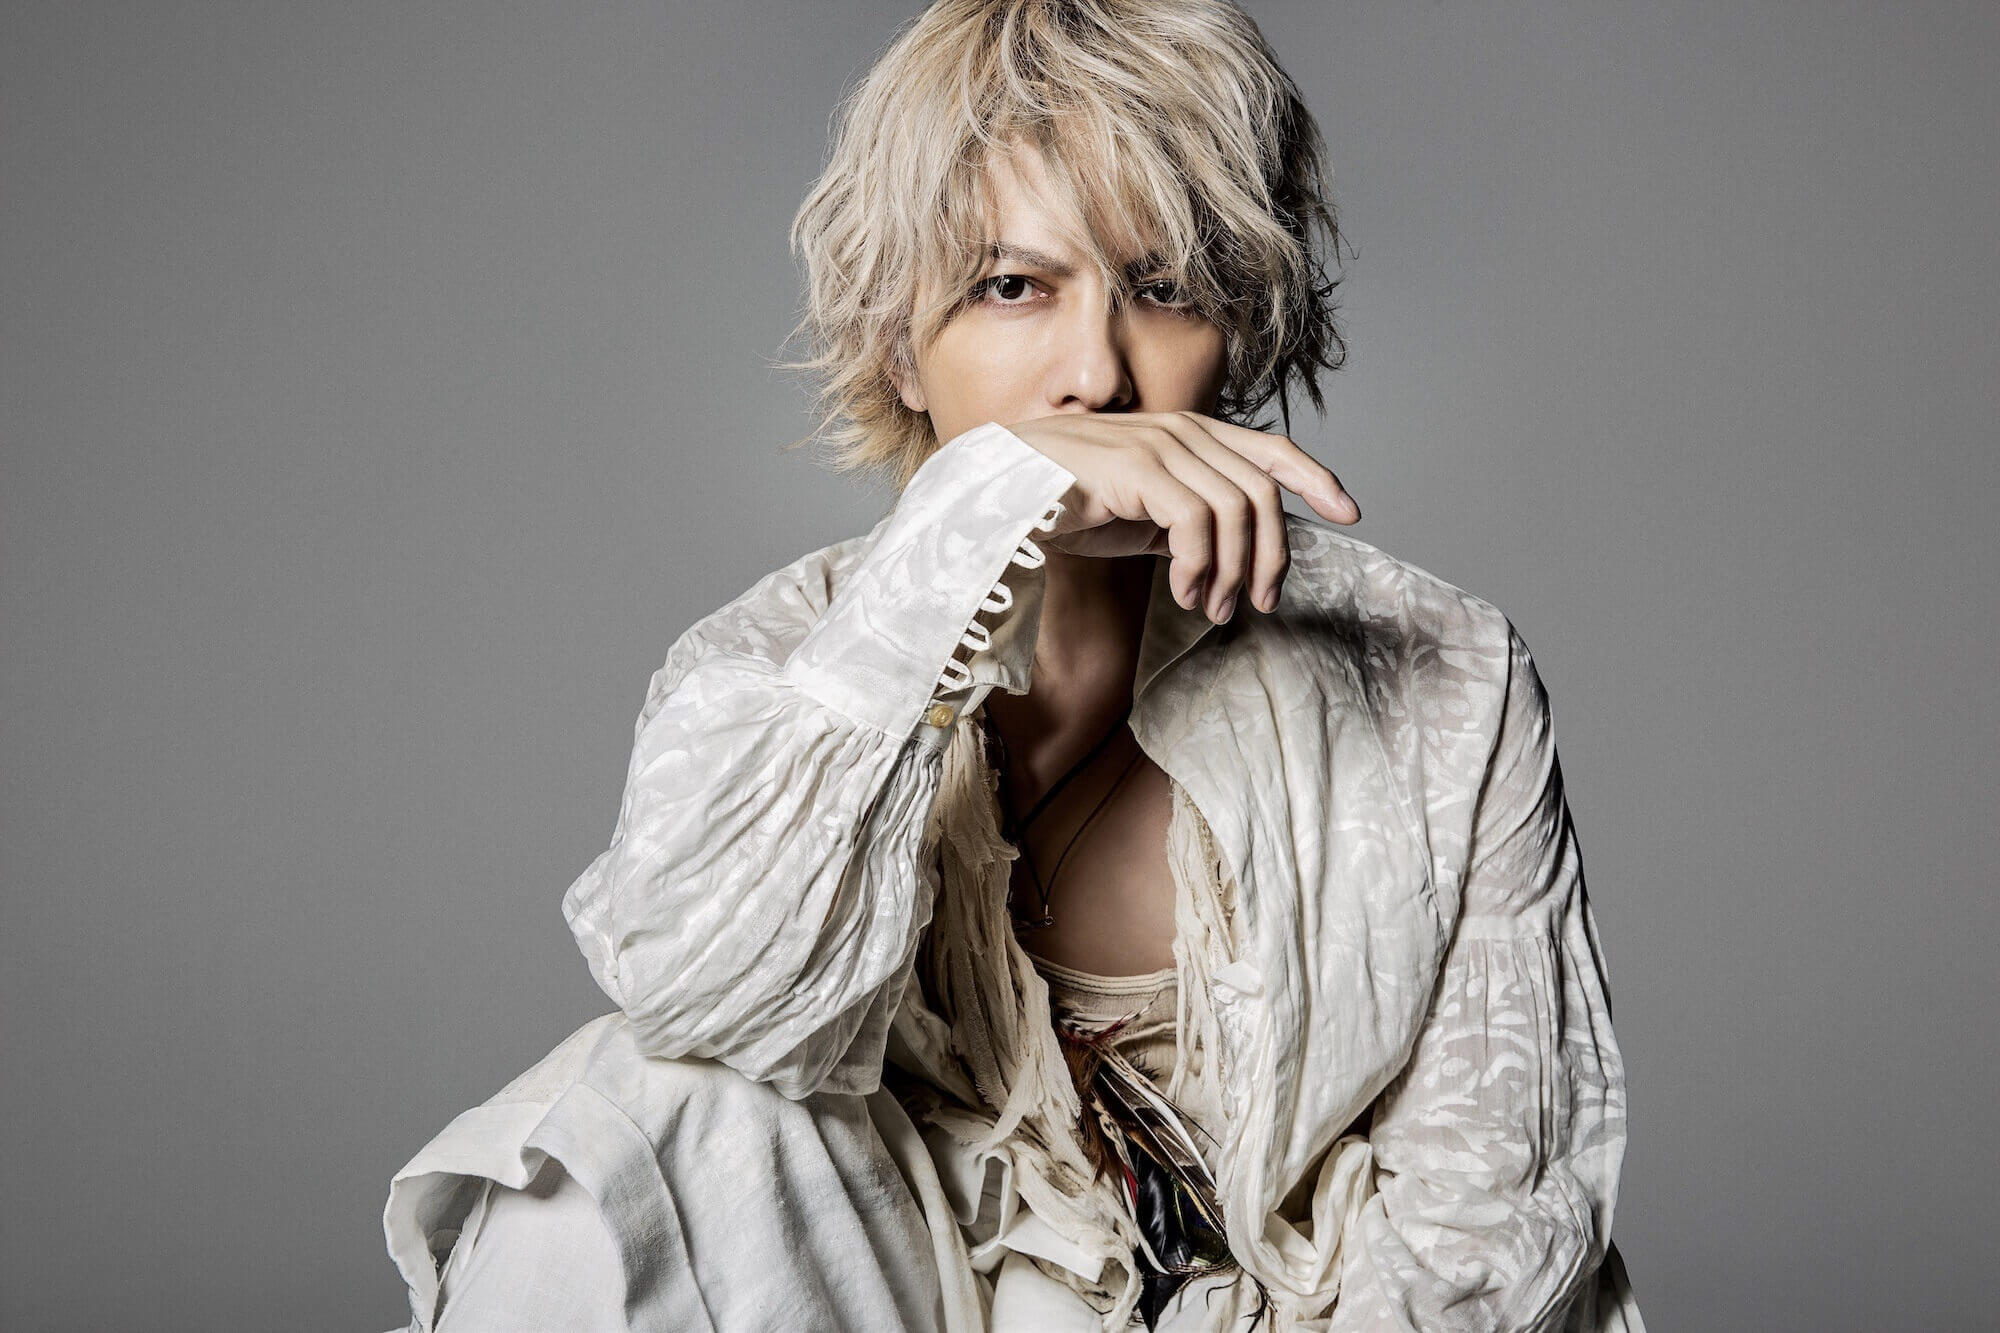 HYDE new remastered collection: “HYDE COMPLETE BOX 2001-2003